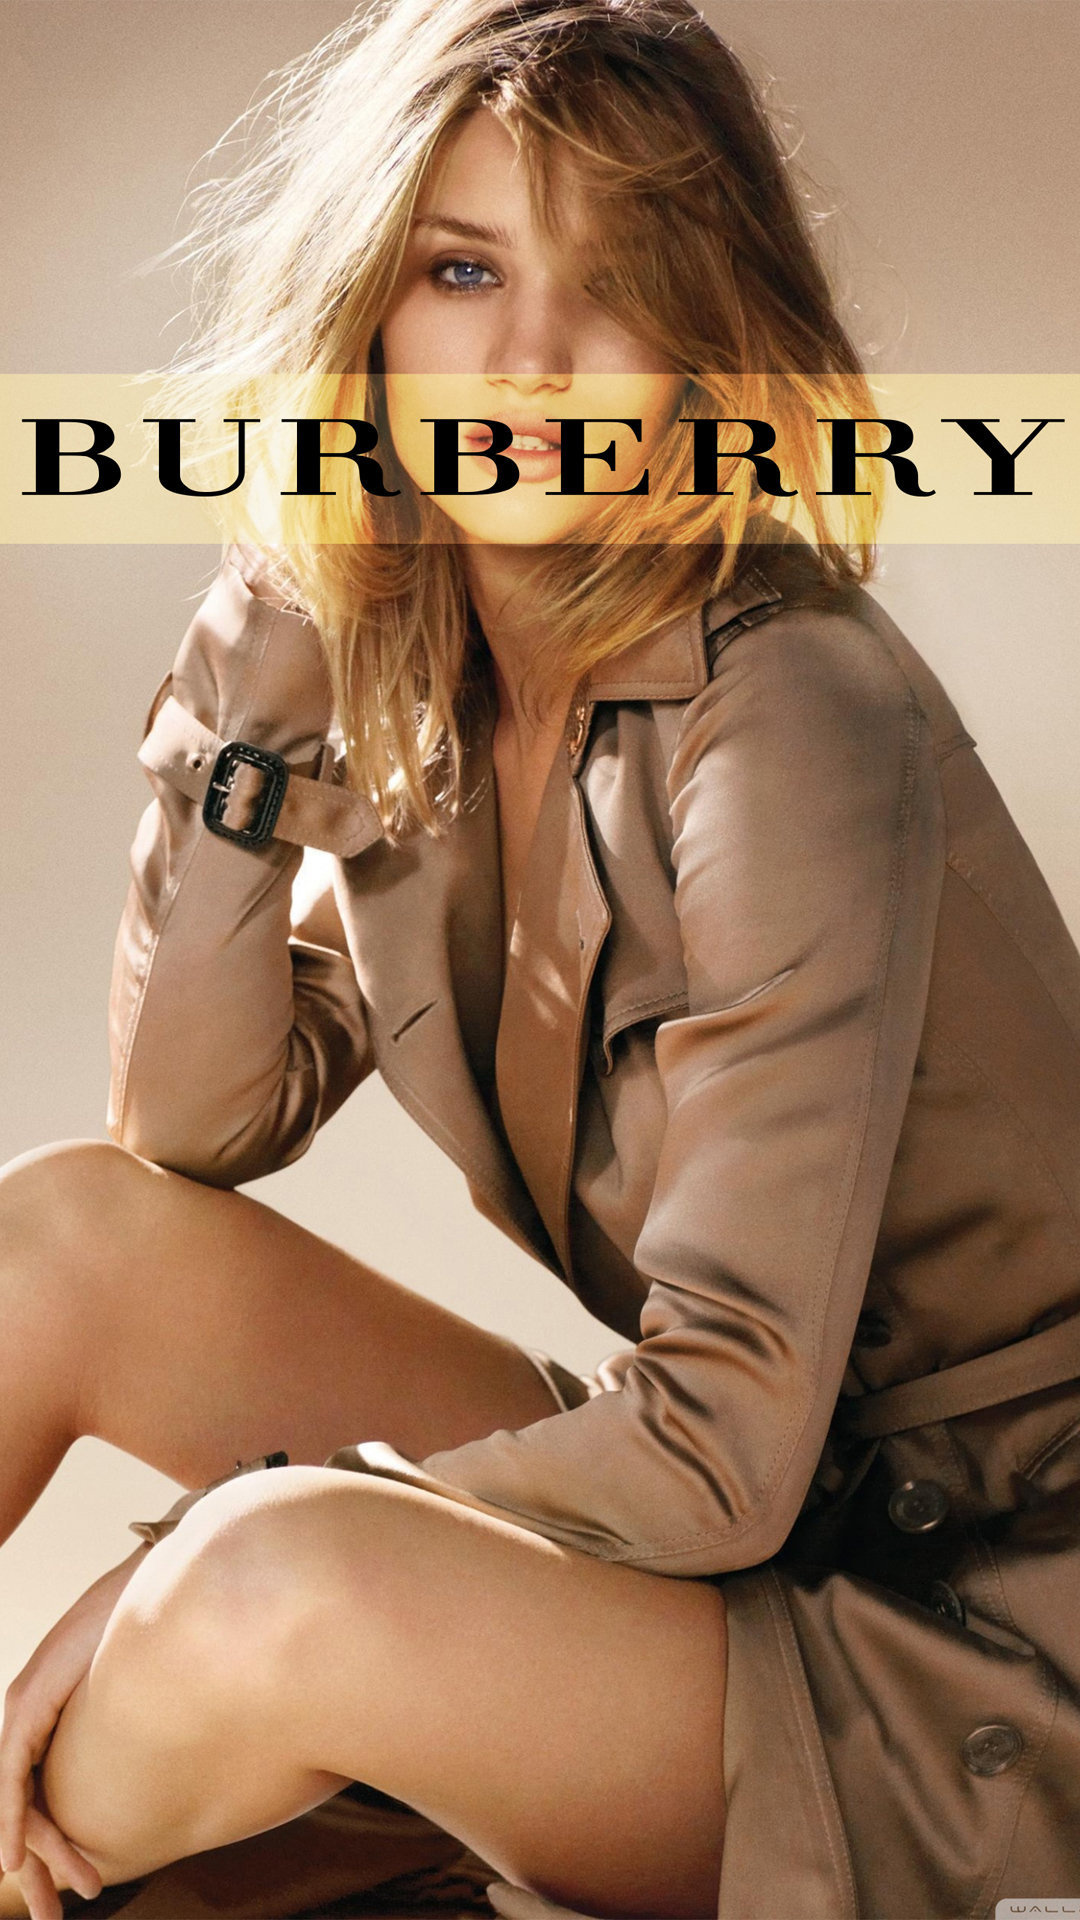 HD wallpaper, Samsung 1080P Burberry Background Image, Luxury Brand, Shipping Experience, 1080X1920 Full Hd Phone, Mobile Aesthetic, Burberry Fashion